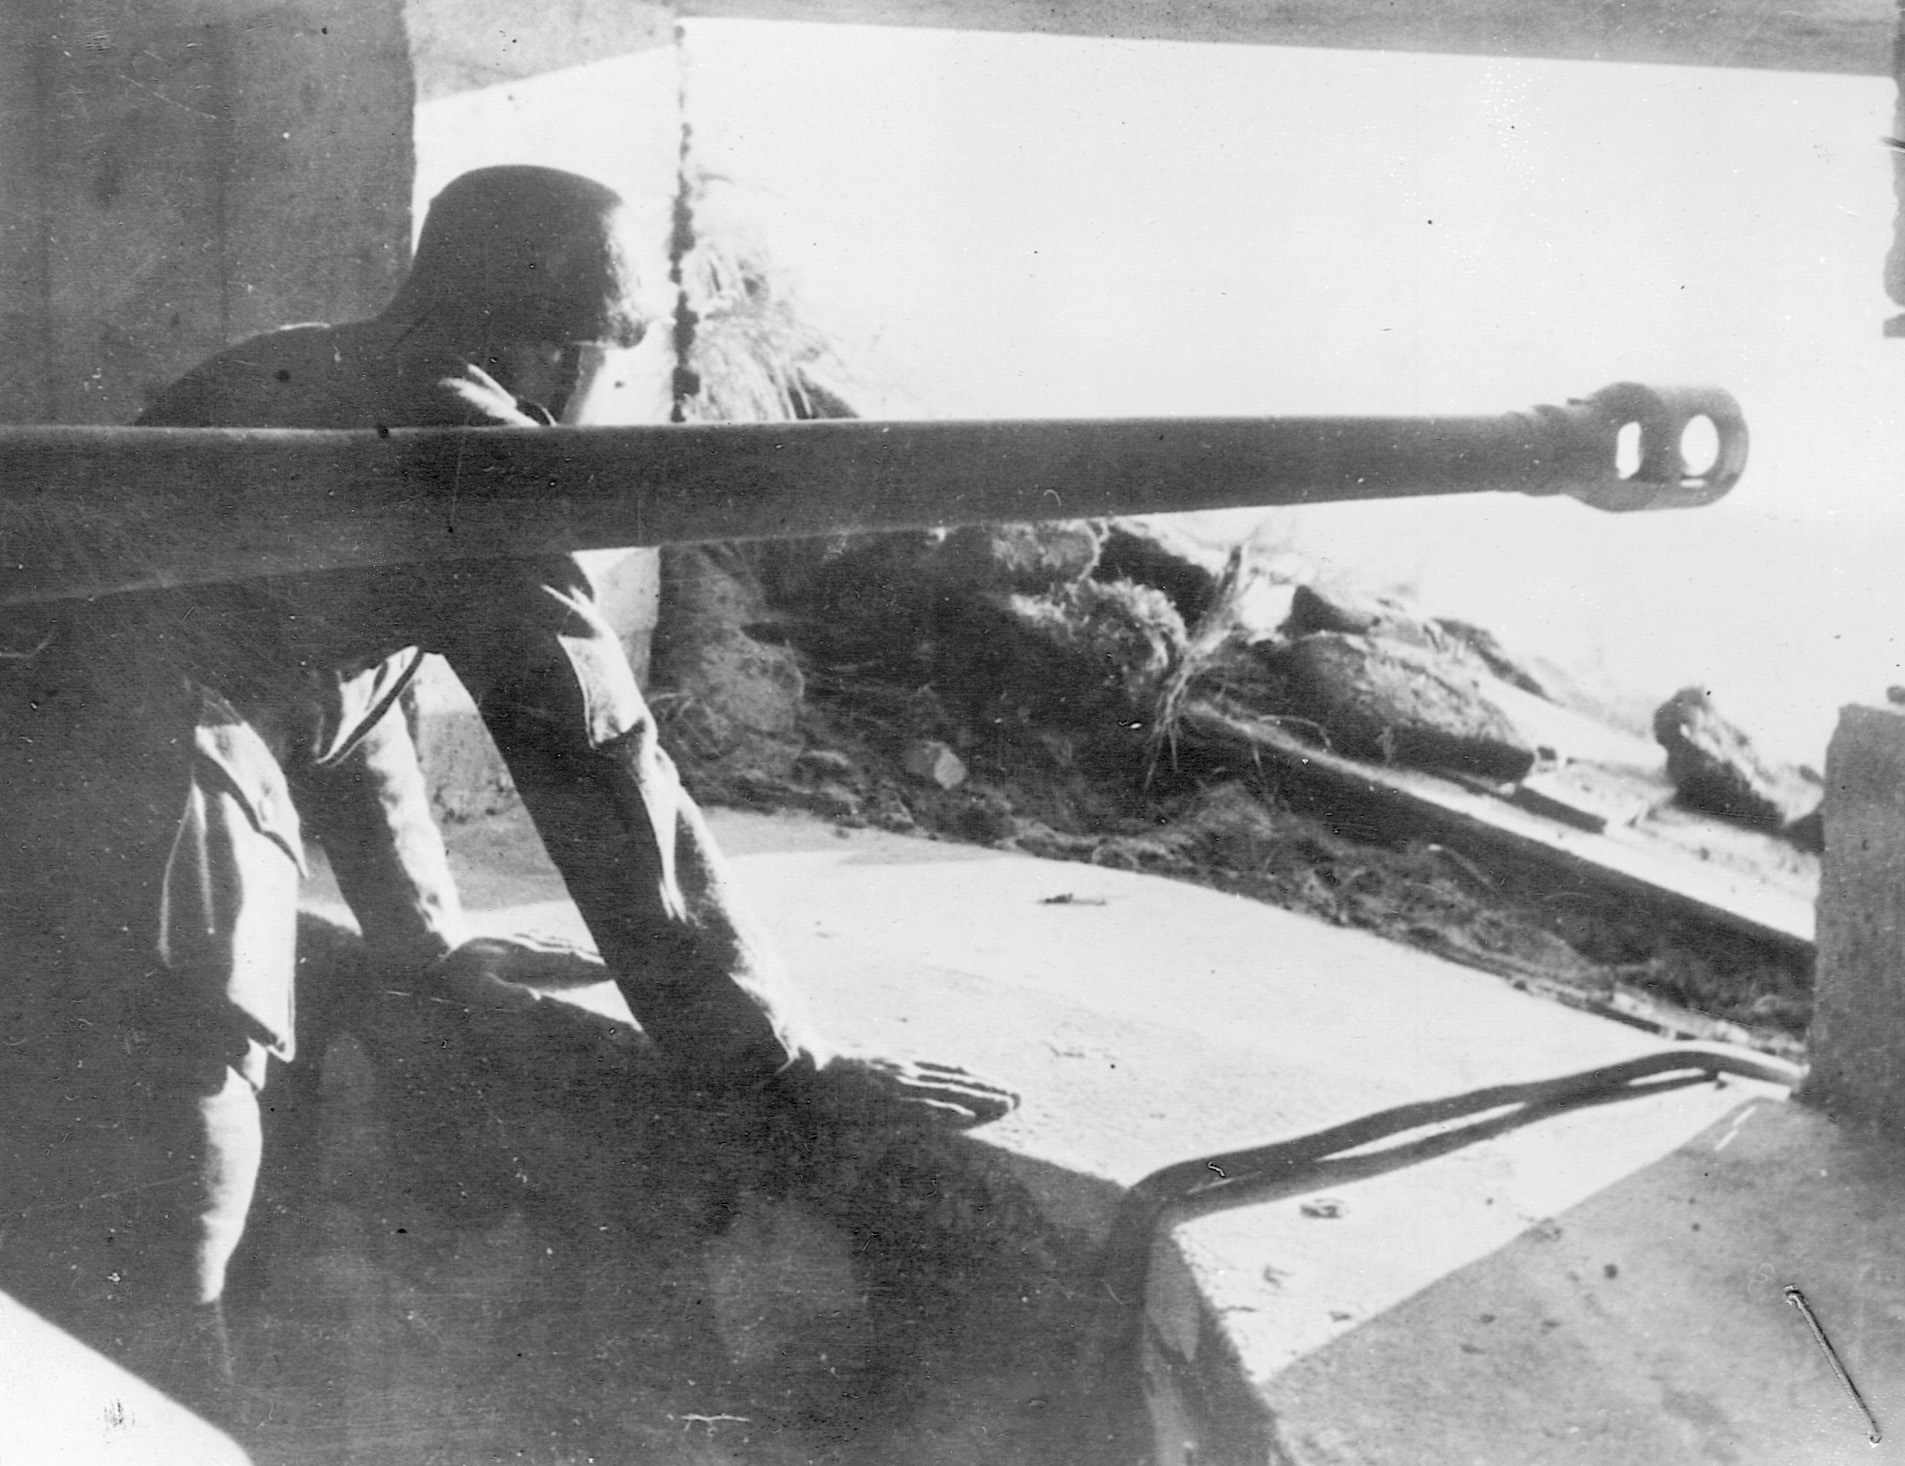 Peering warily from his concrete-reinforced gun emplacement, a German soldier contemplates the coming invasion of Europe.